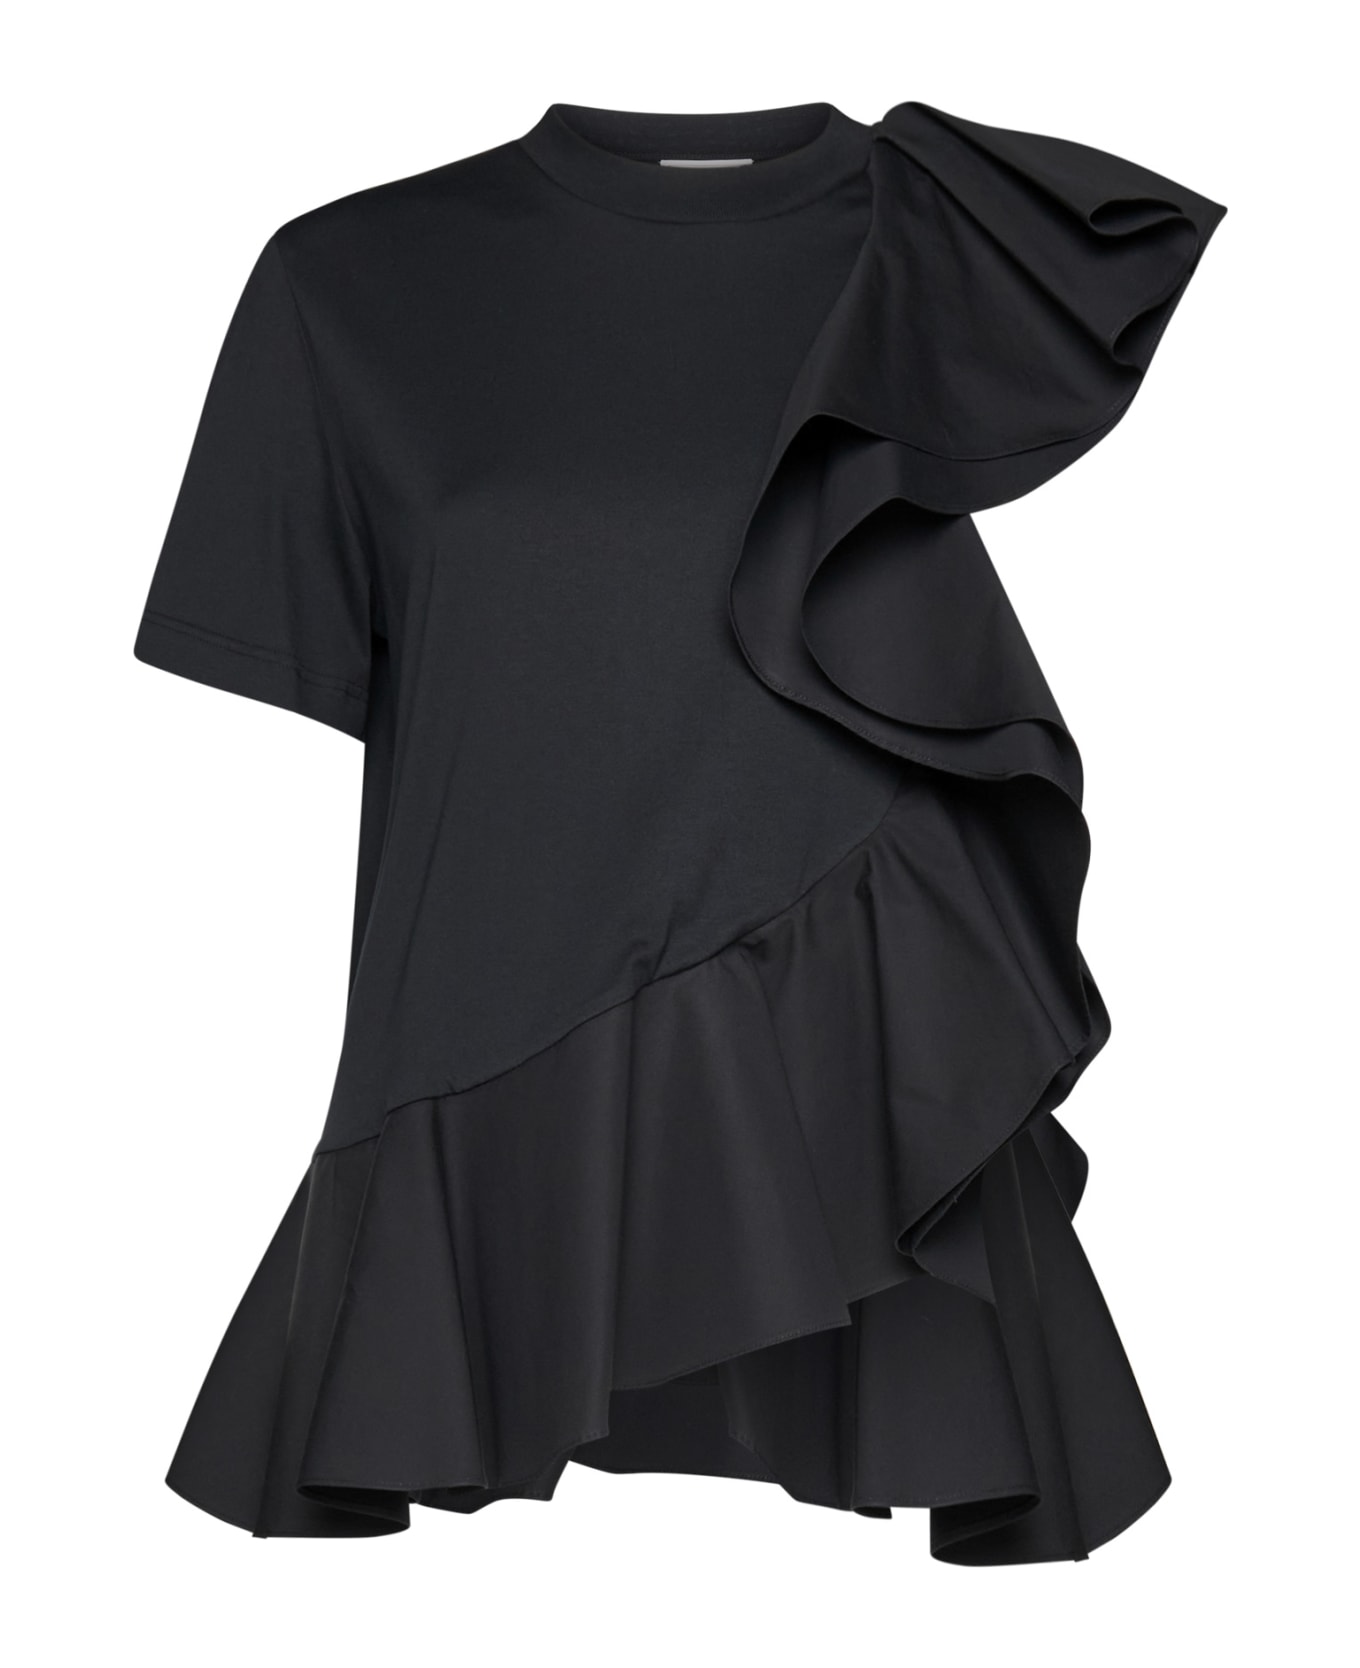 Alexander McQueen Cotton T-shirt With Lateral Rouches - Black シャツ